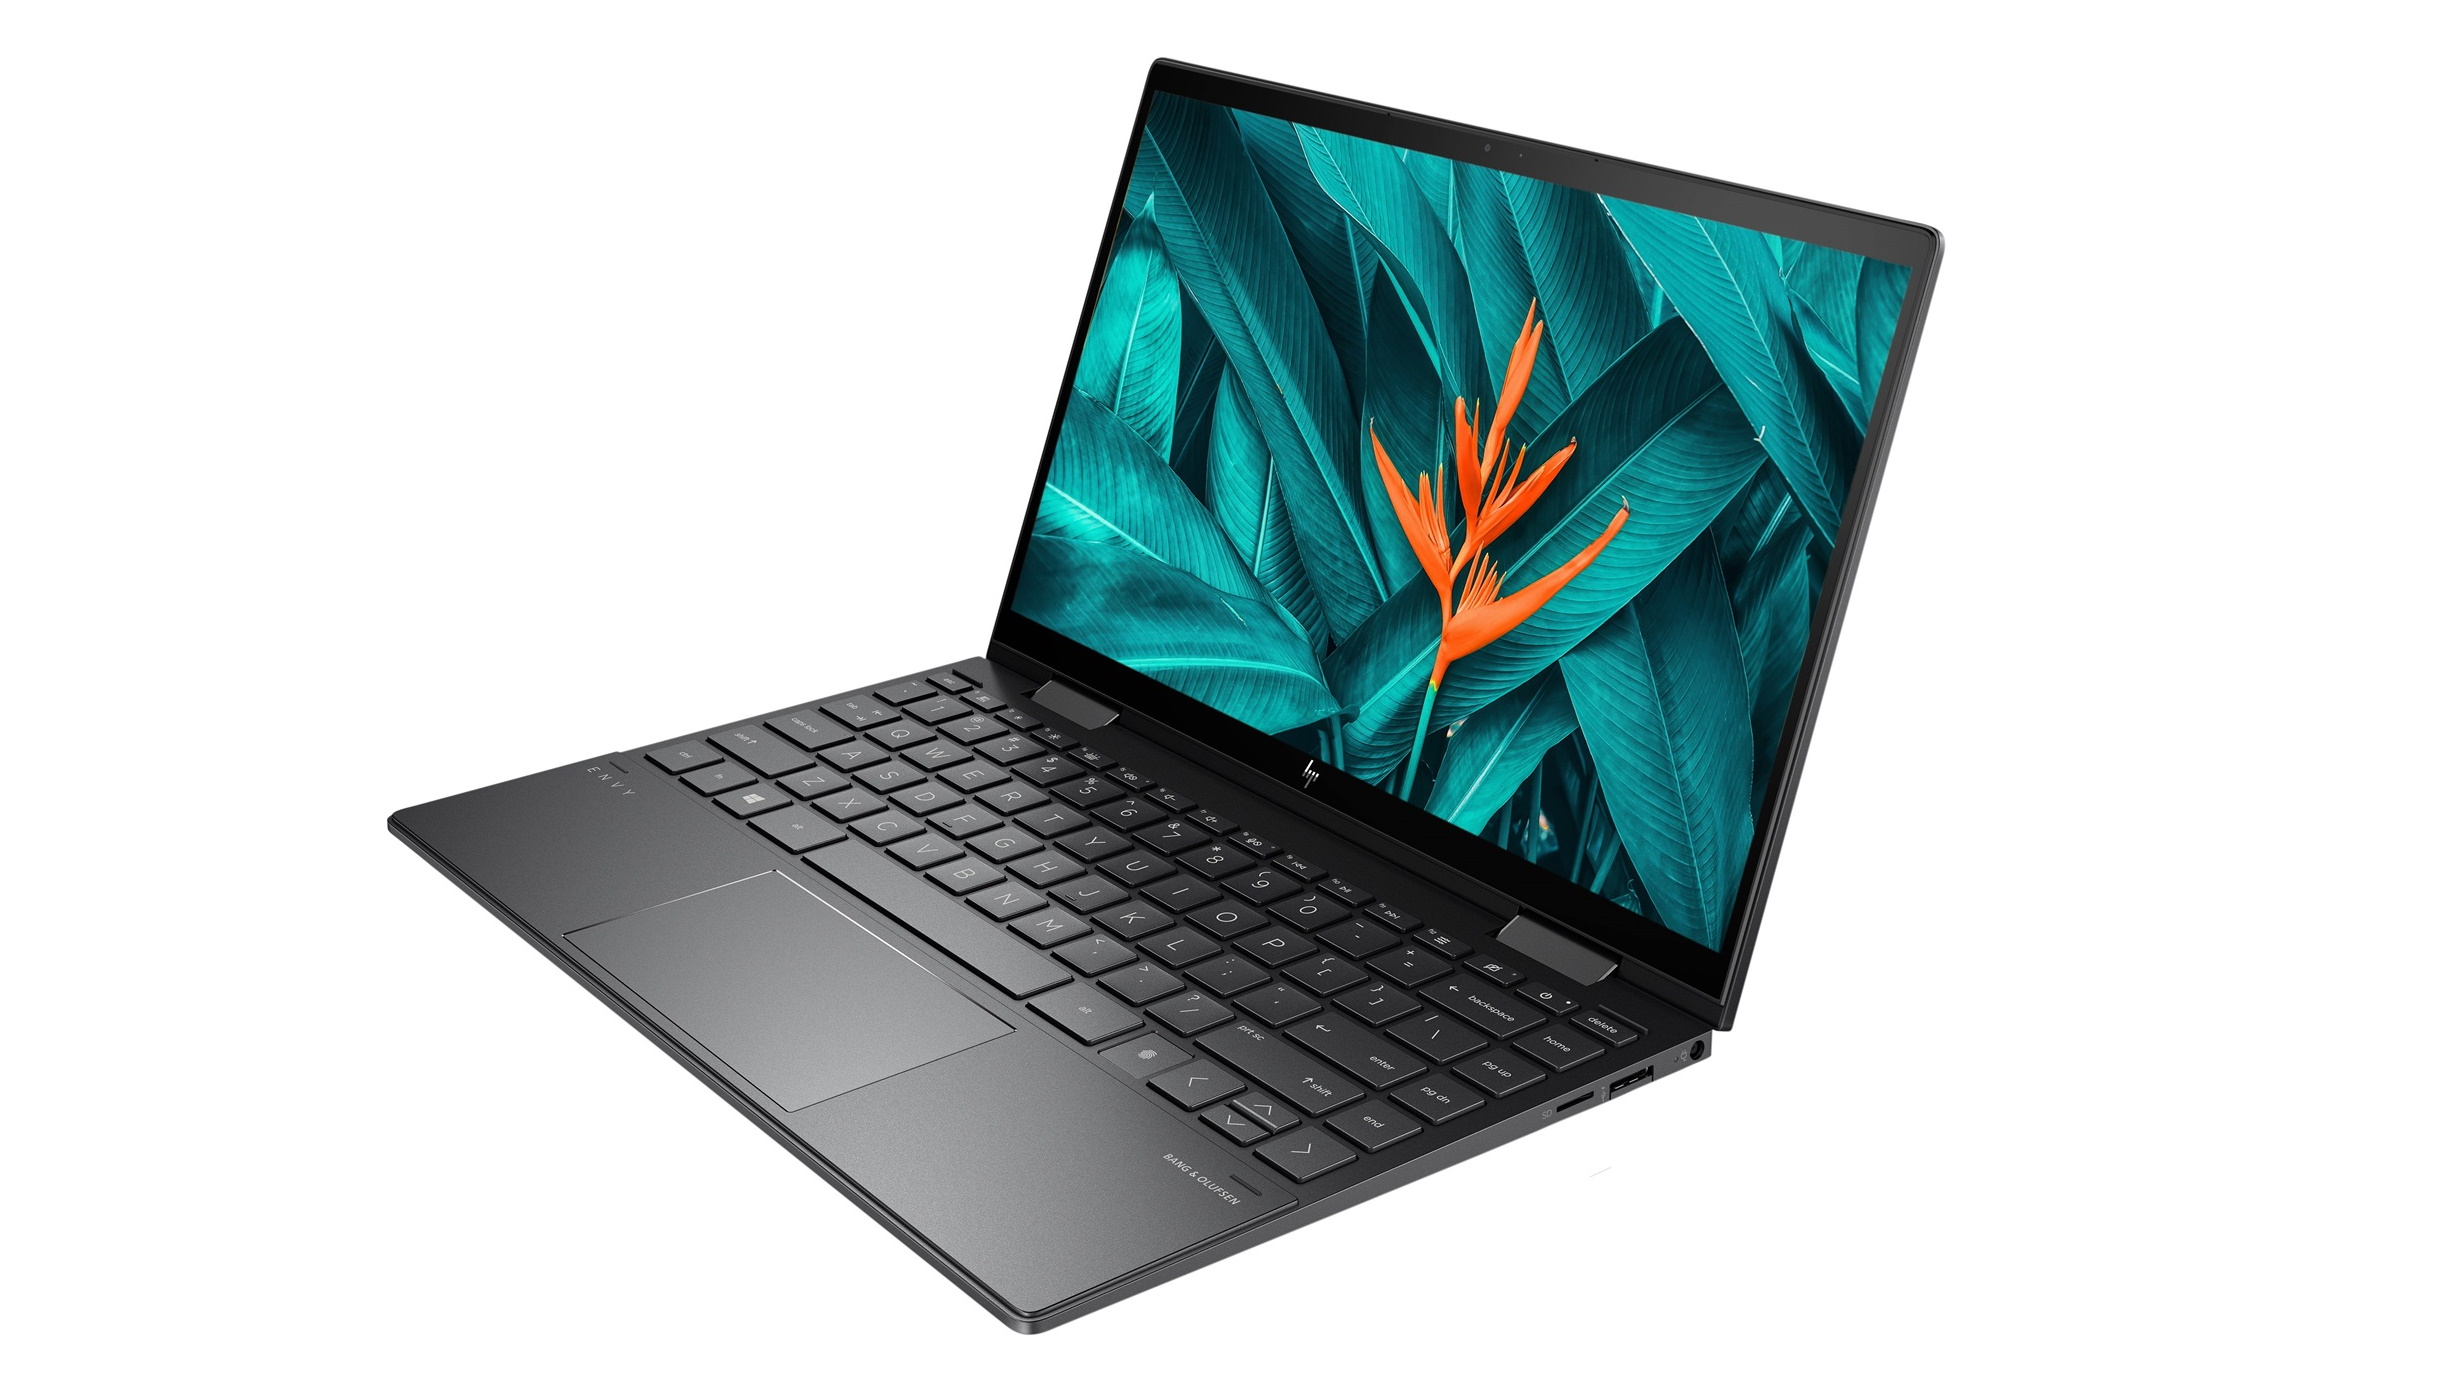 Image of the HP Envy x360 13 (2020) laptop from the side